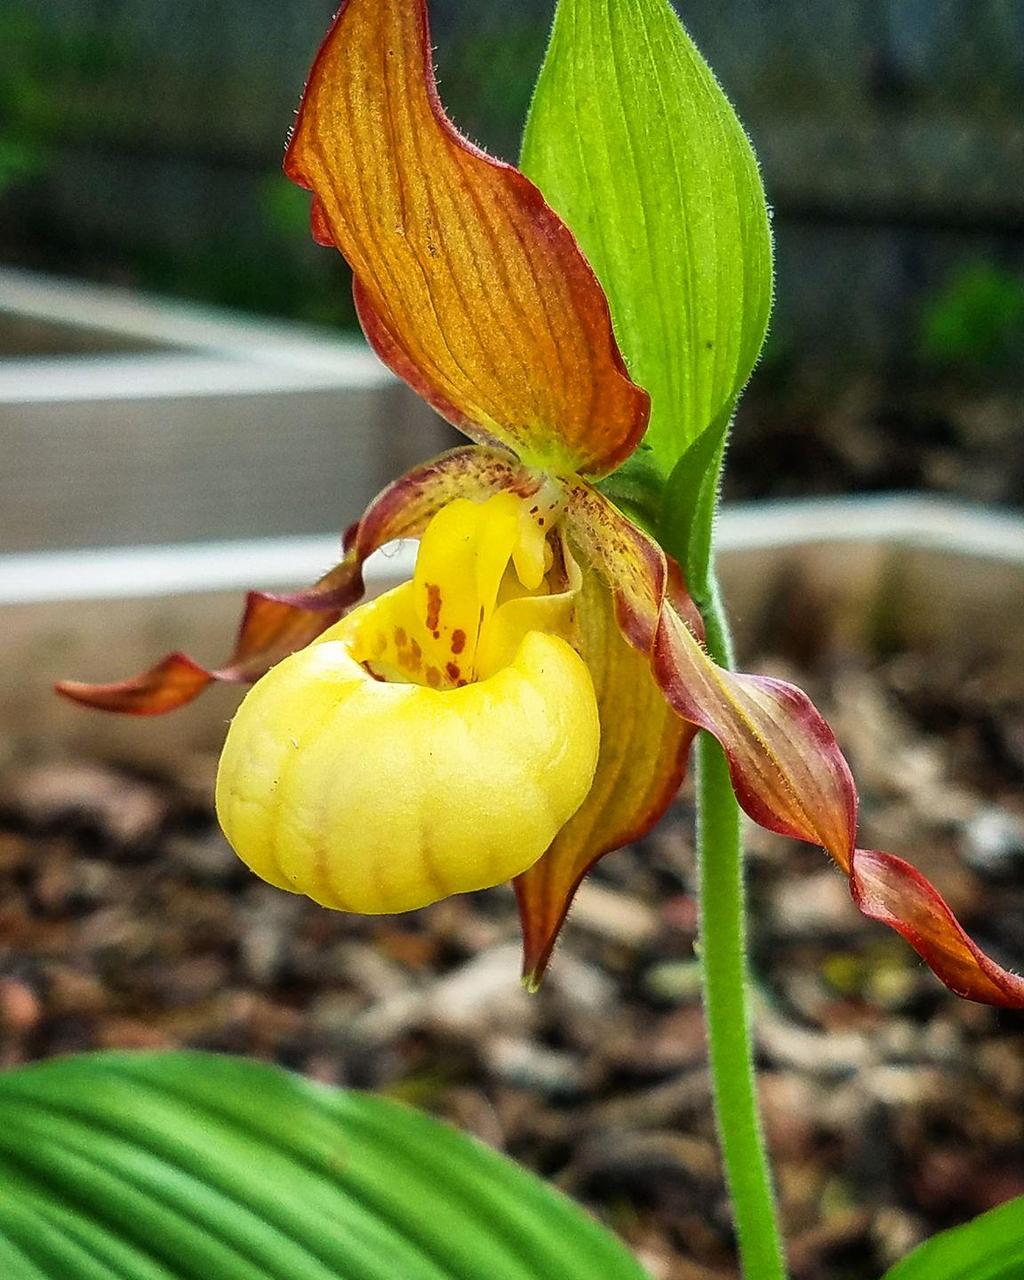 Cypripedium parviflorum By Cypripedium parviflorum, commonly known as yellow lady's slipper or moccasin flower, is a lady's slipperorchid found in North America.